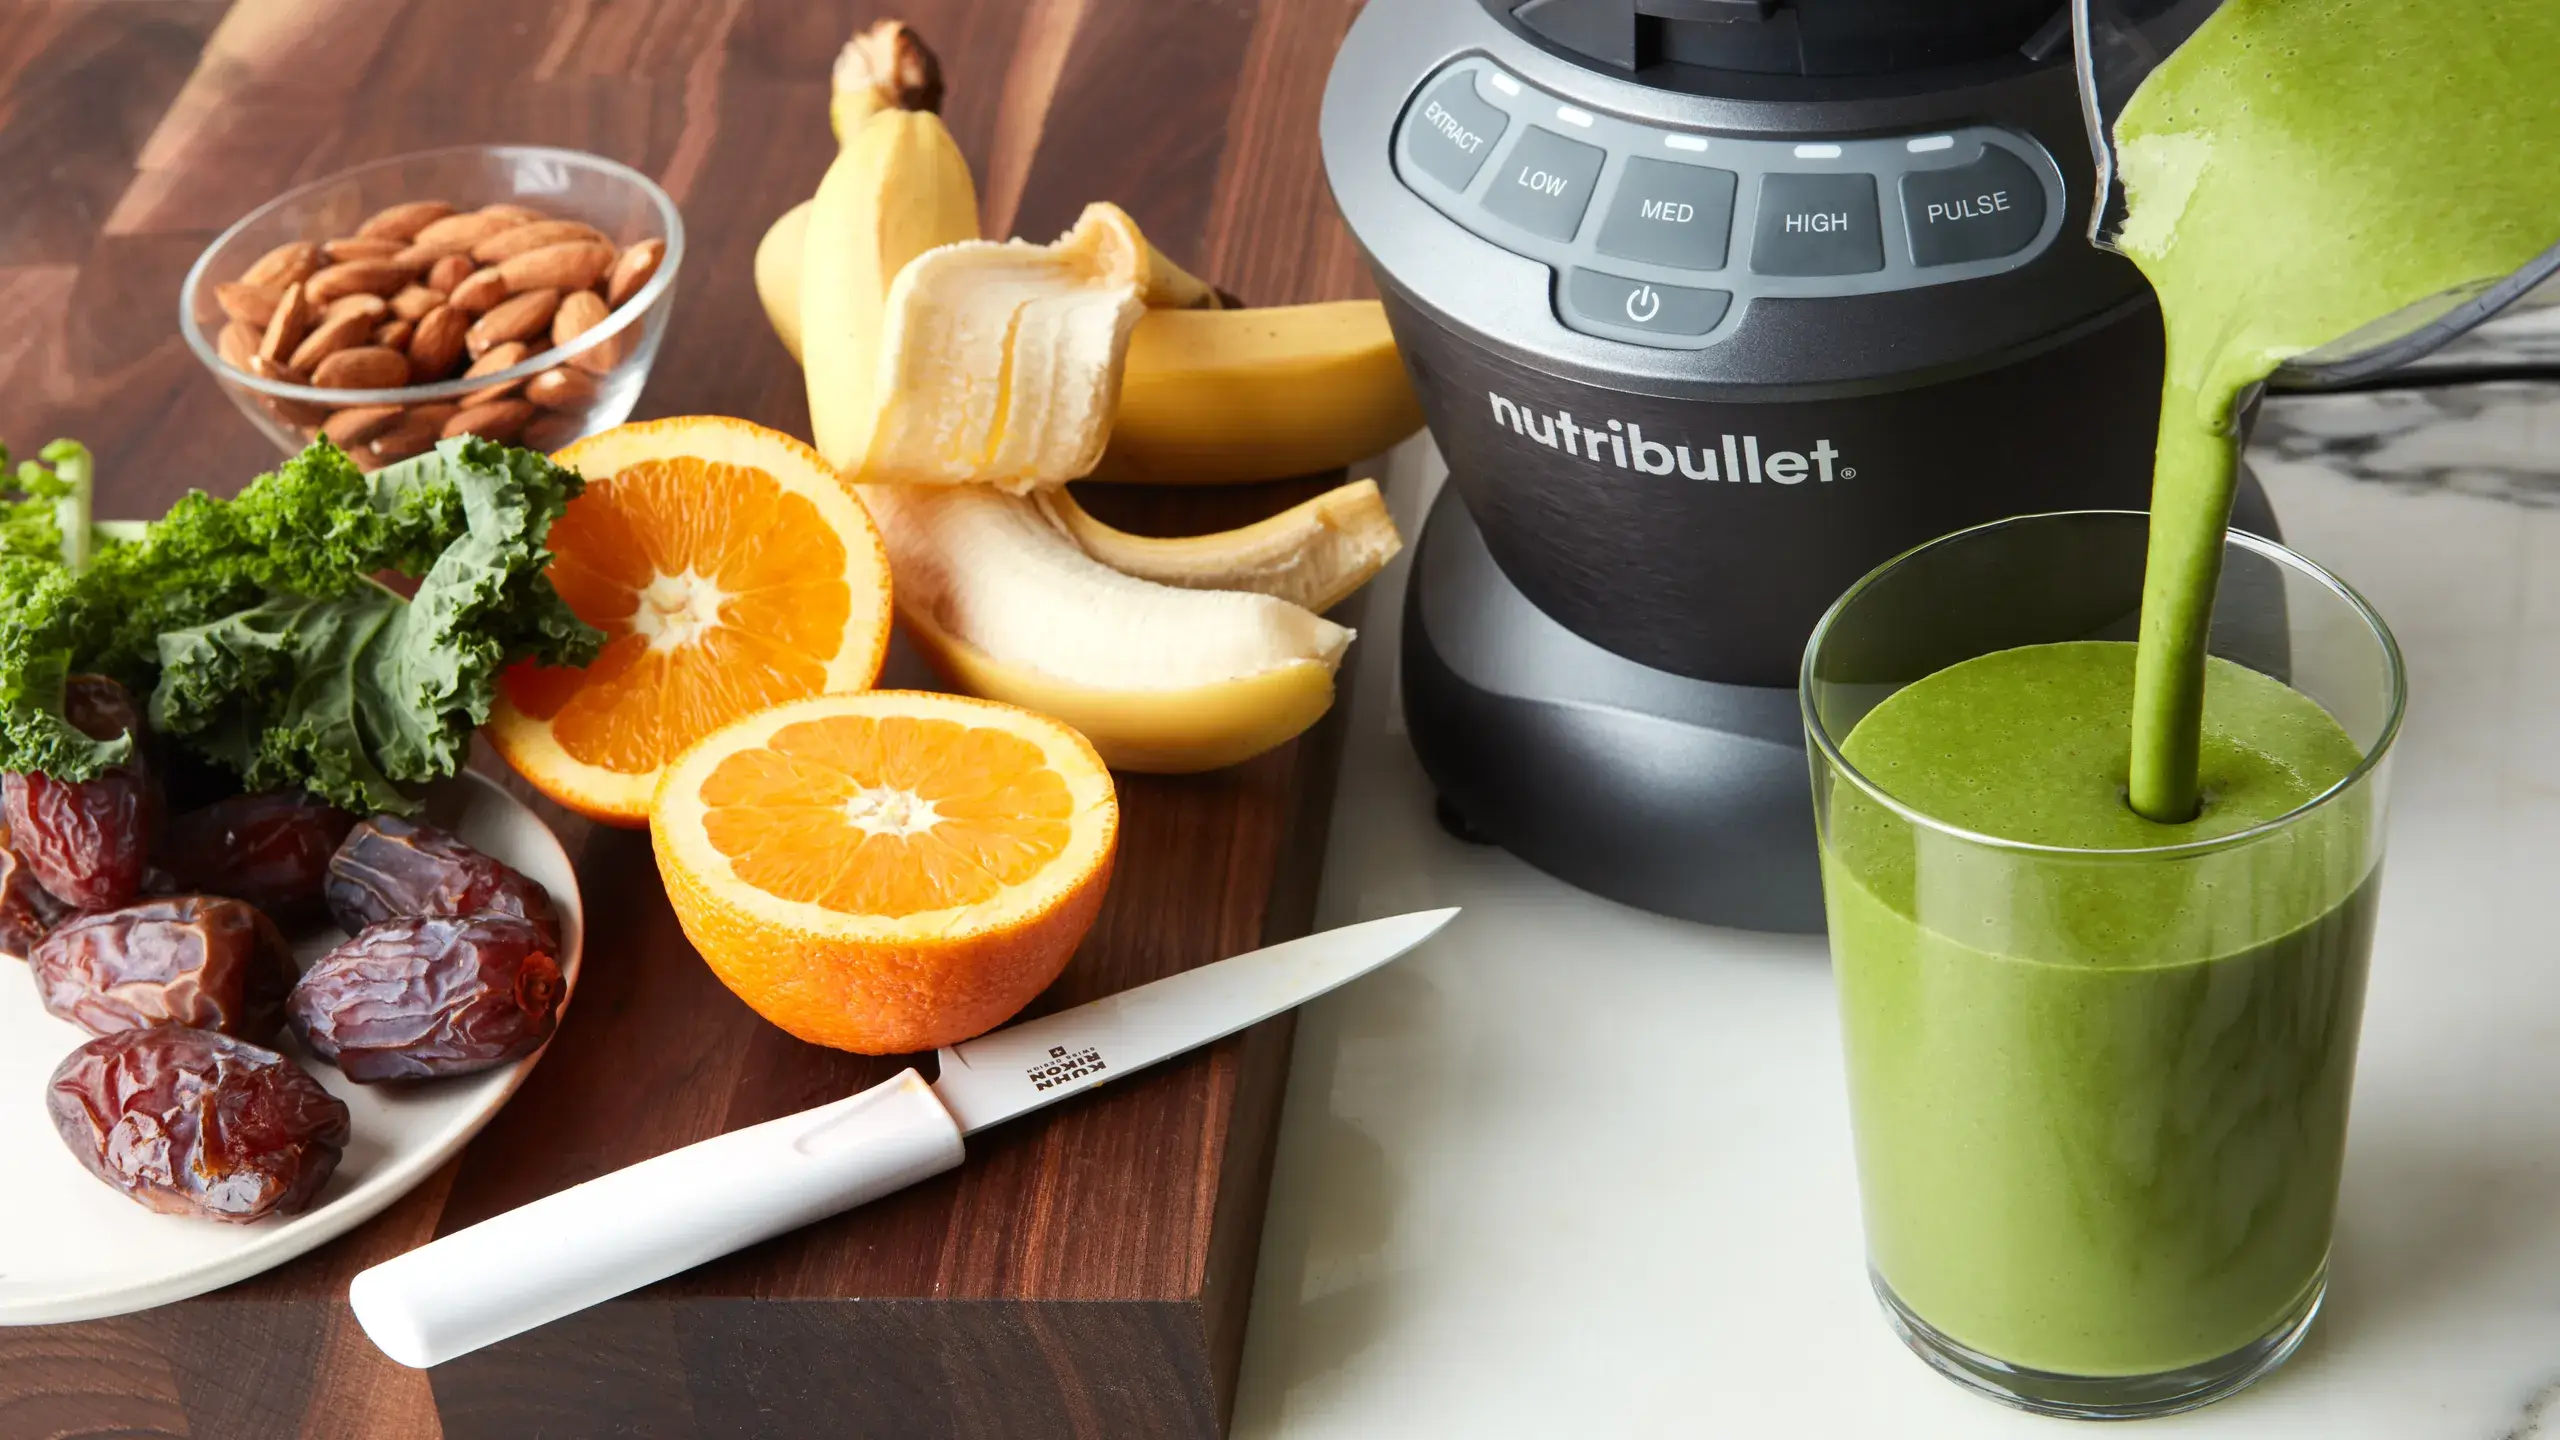 The Nutribullet Pro 900 Review: Is It Worth Investing In?